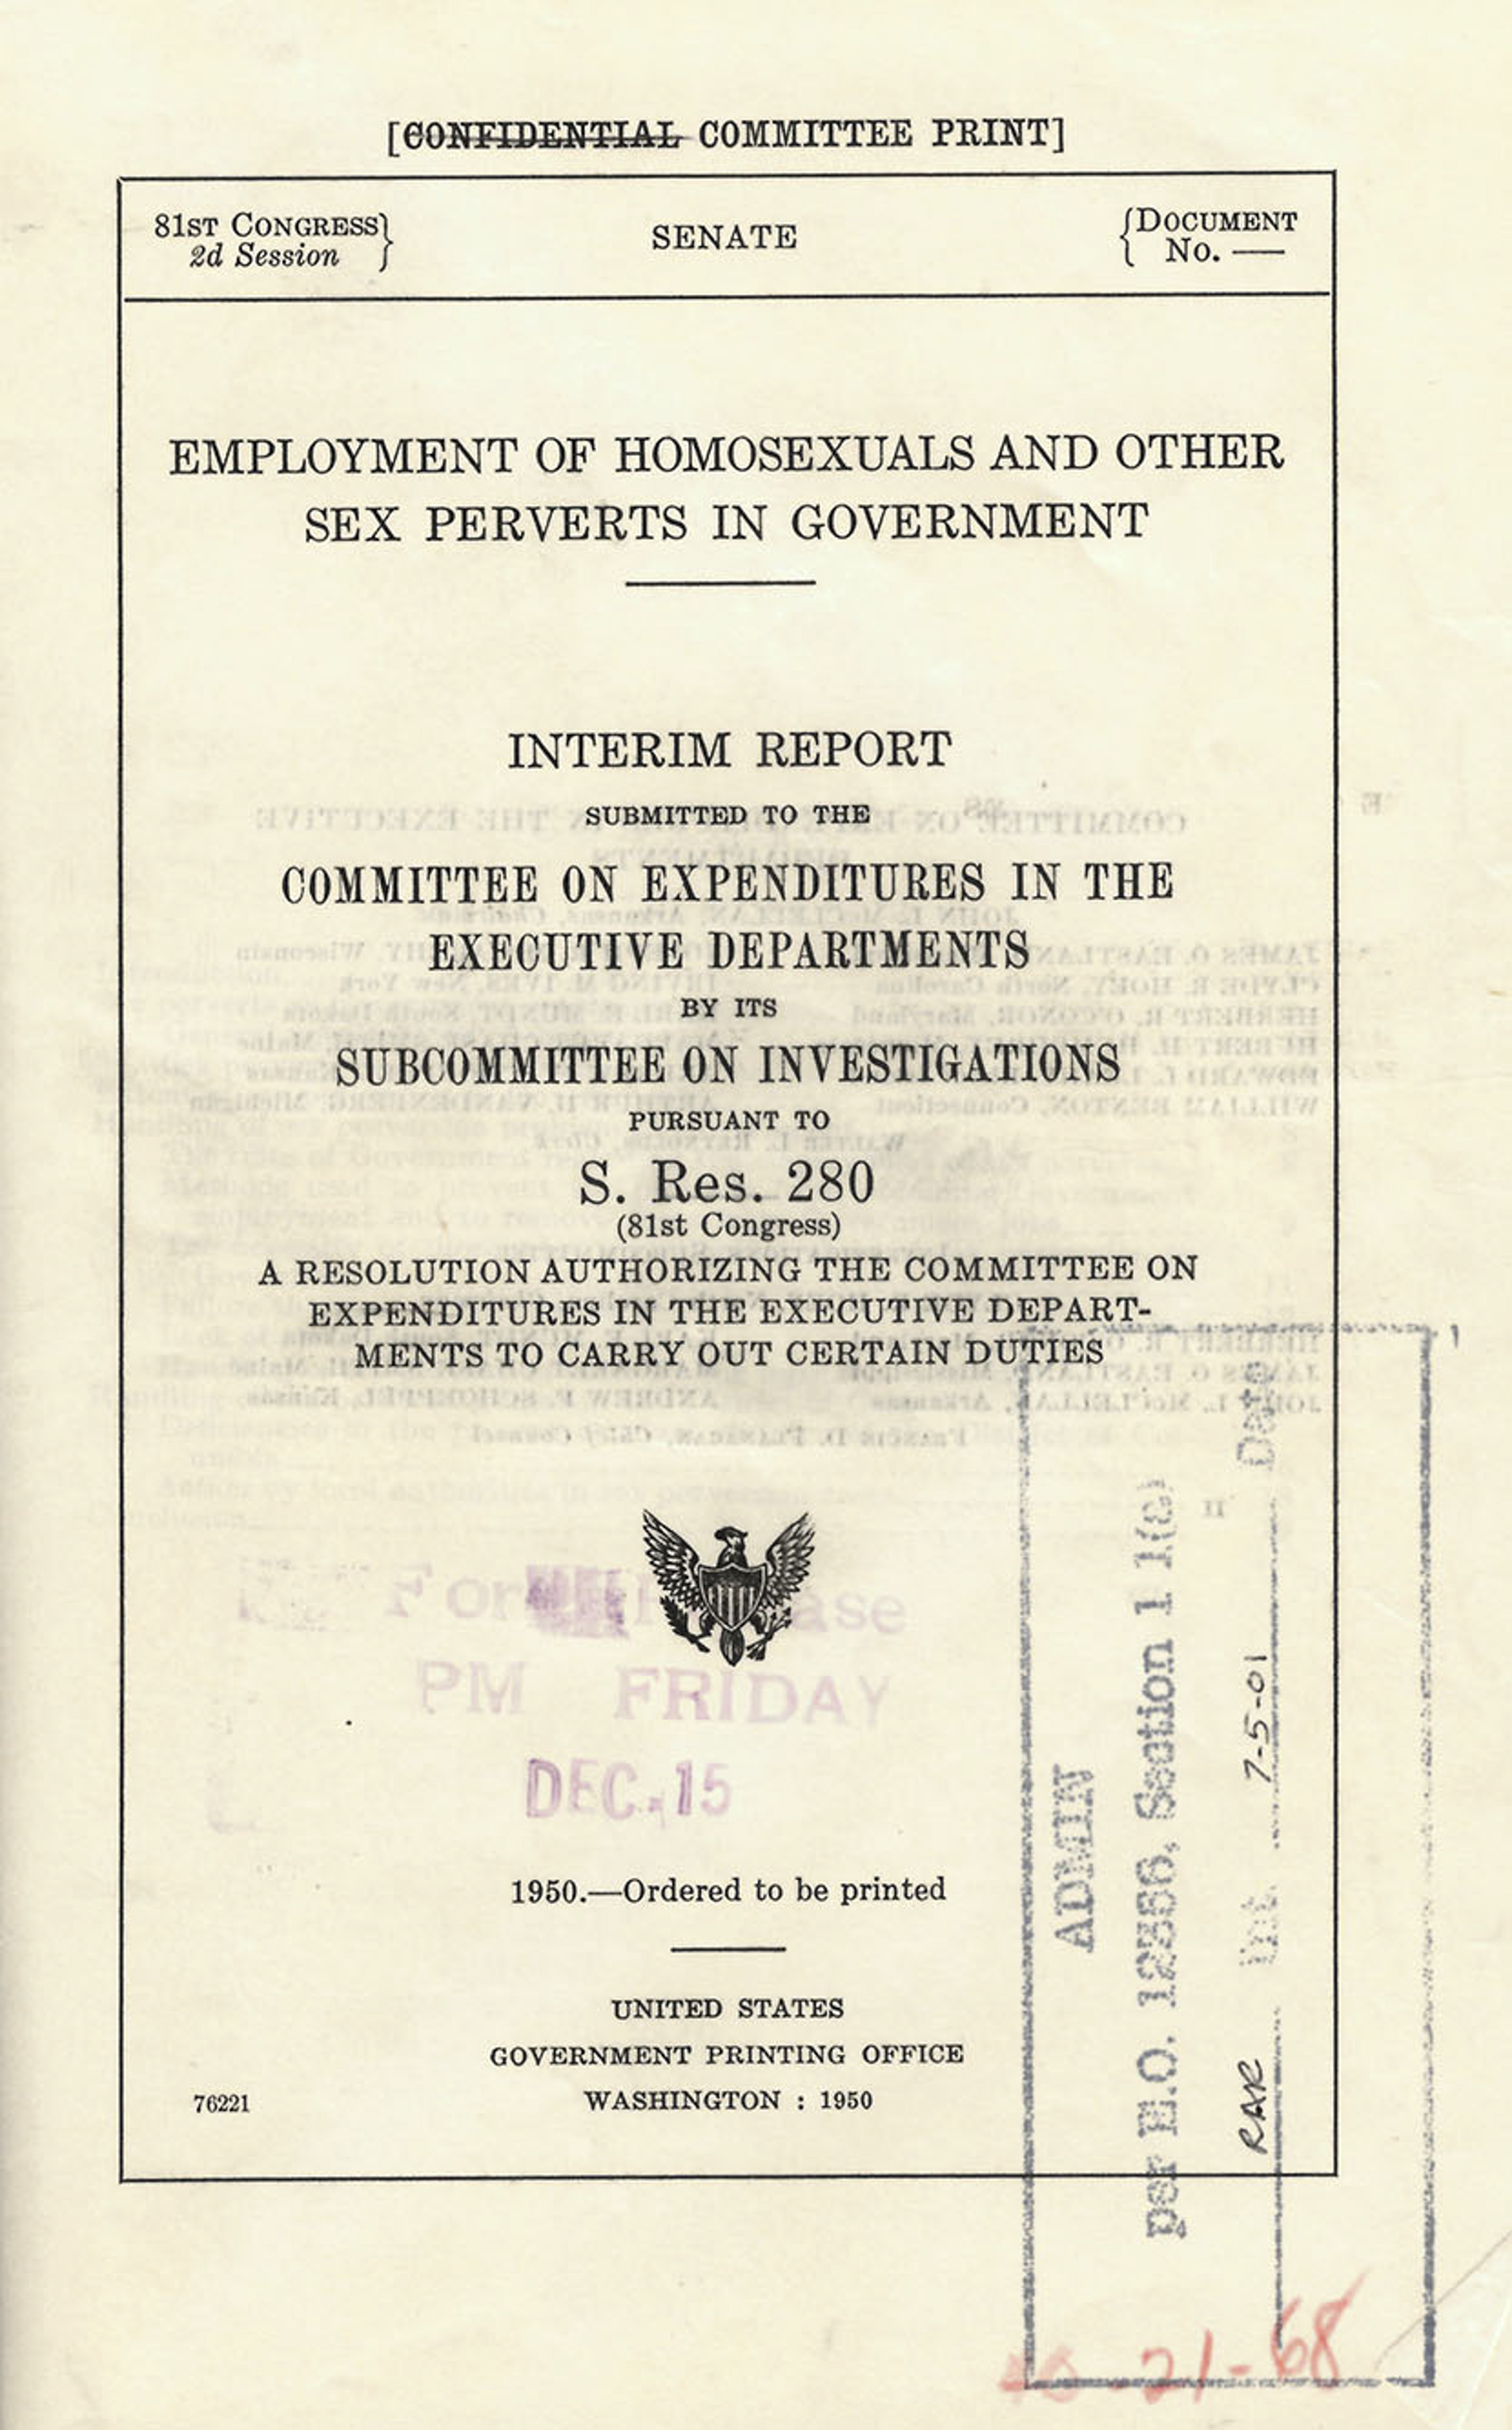 Employment of Homosexuals nad other Sex Perverts in Government - Interim Report - Committee on Expenditures in the Executive Departments by its Subcommittee on Inviestigations